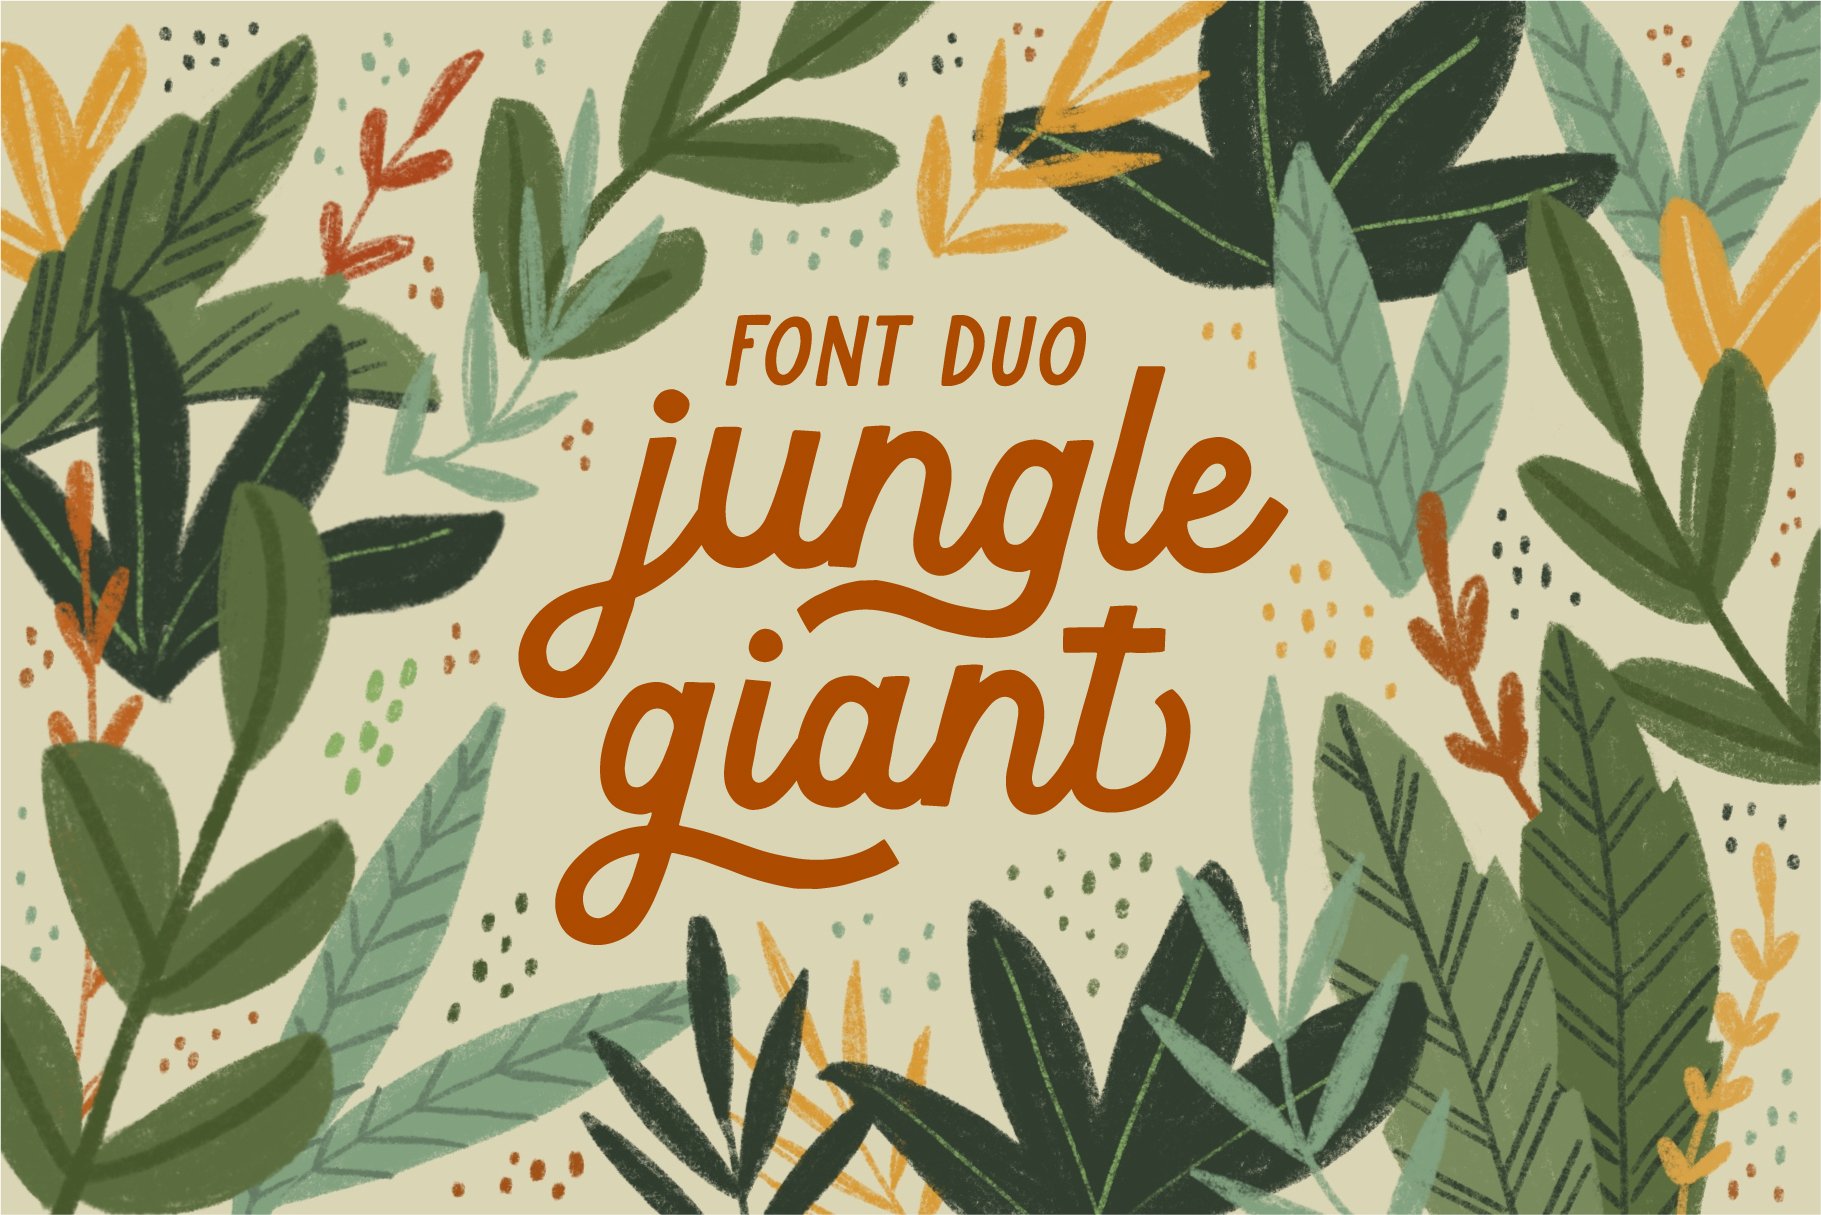 Jungle Giant Font Duo cover image.